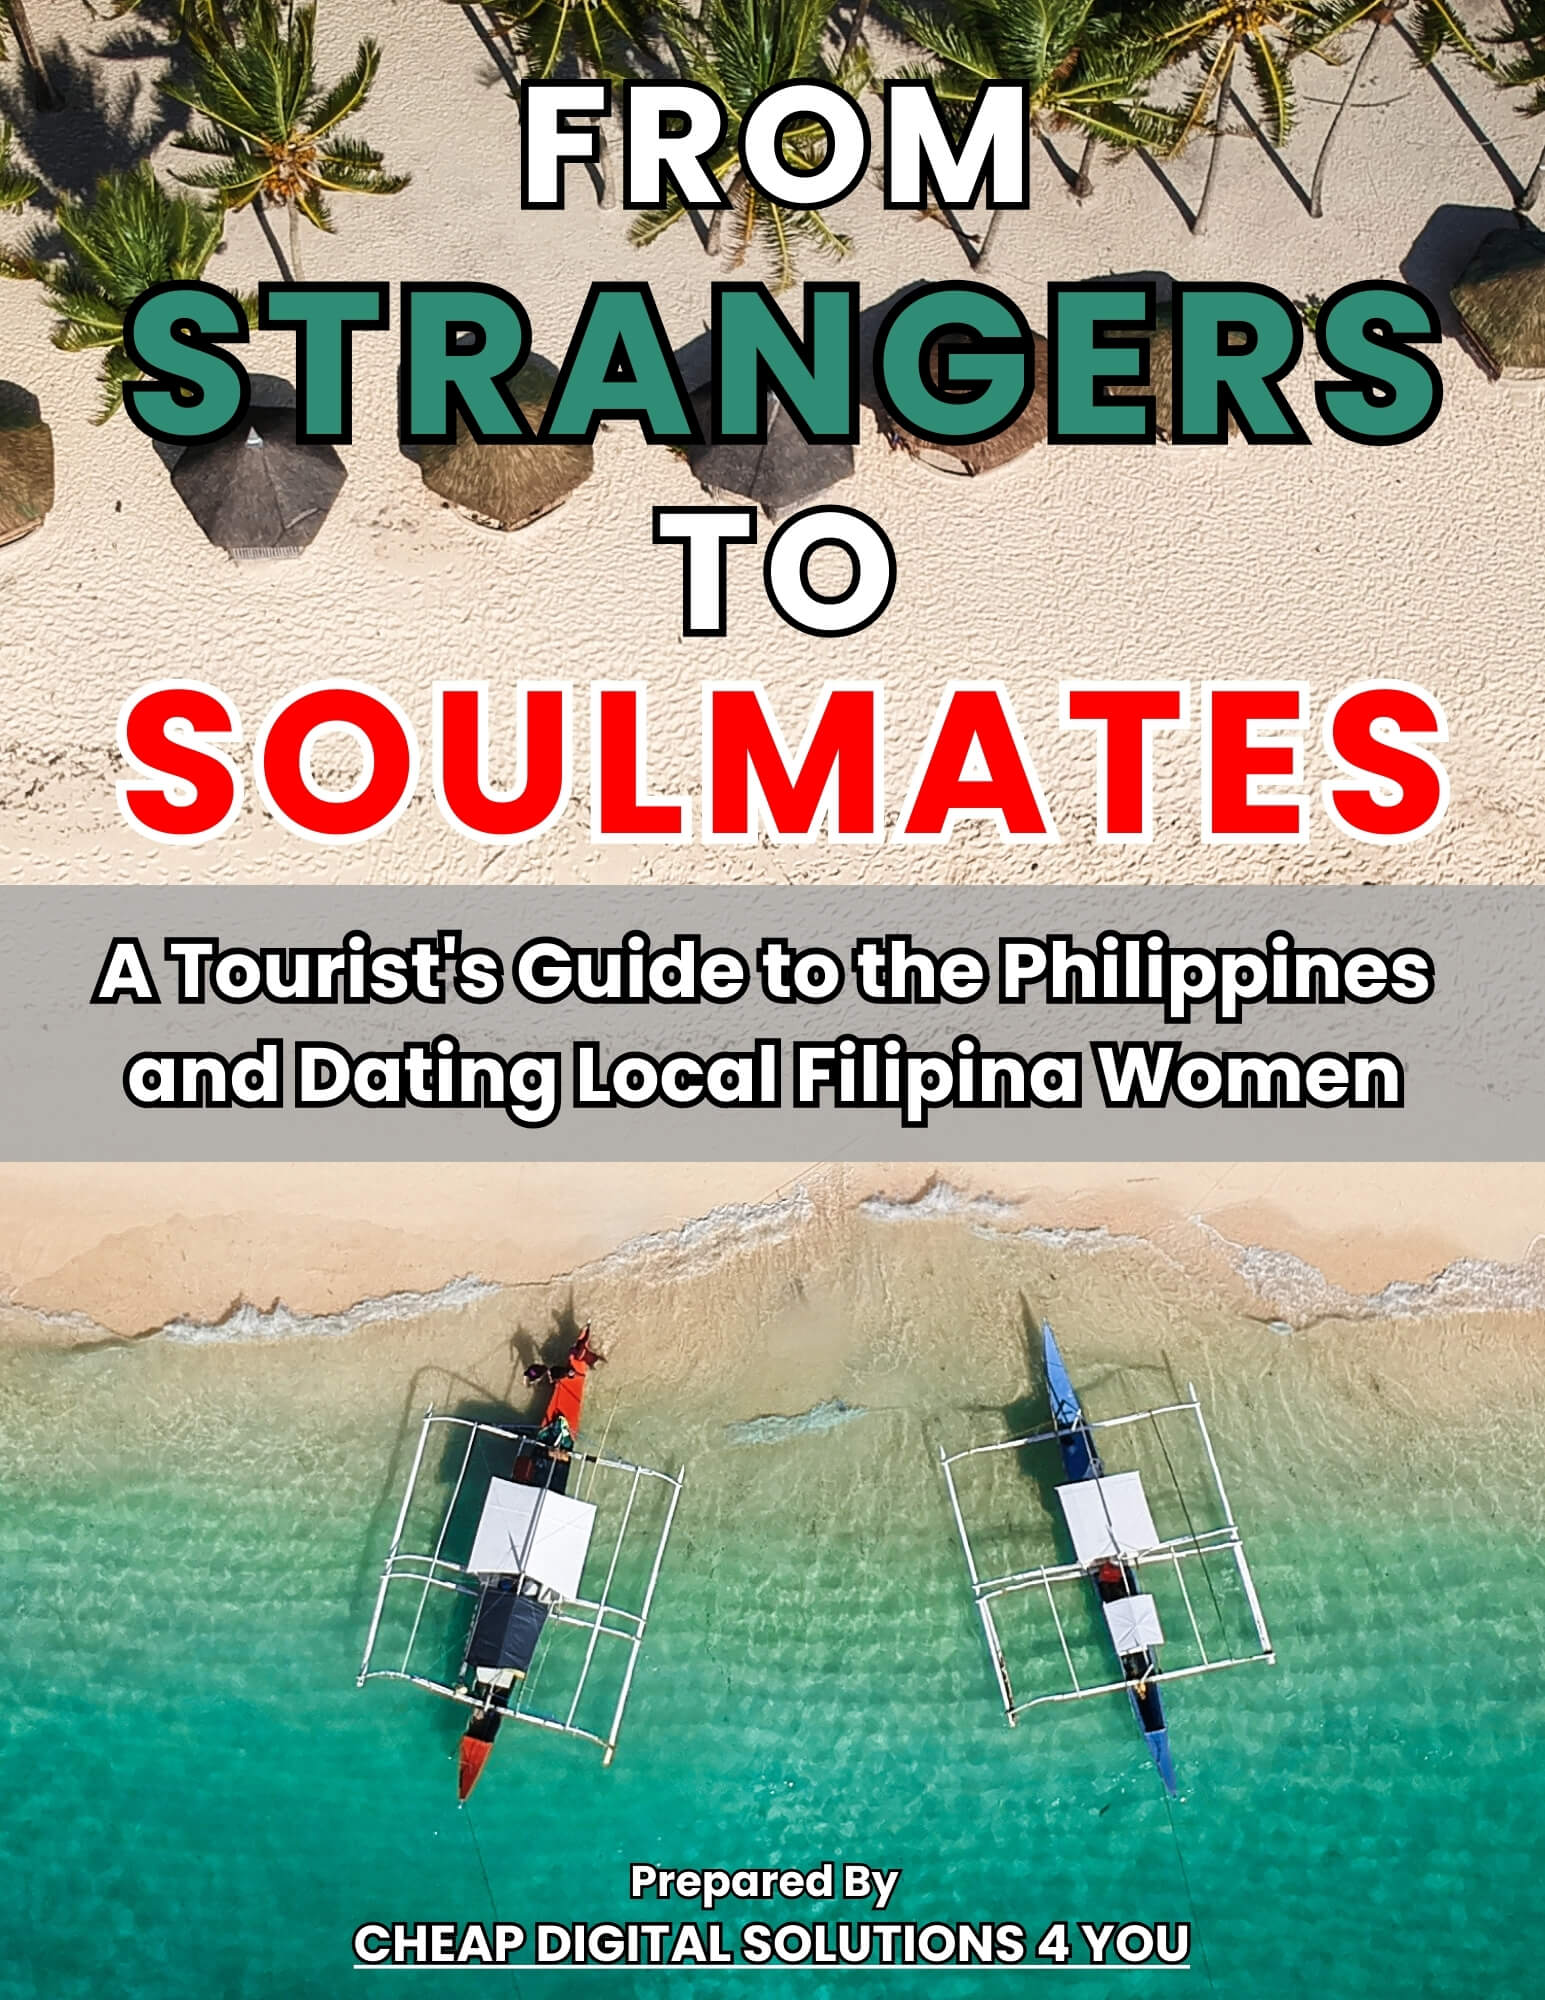 From Strangers to Soulmates - A Tourist's Guide to the Philippines and Dating Local Filipina Women